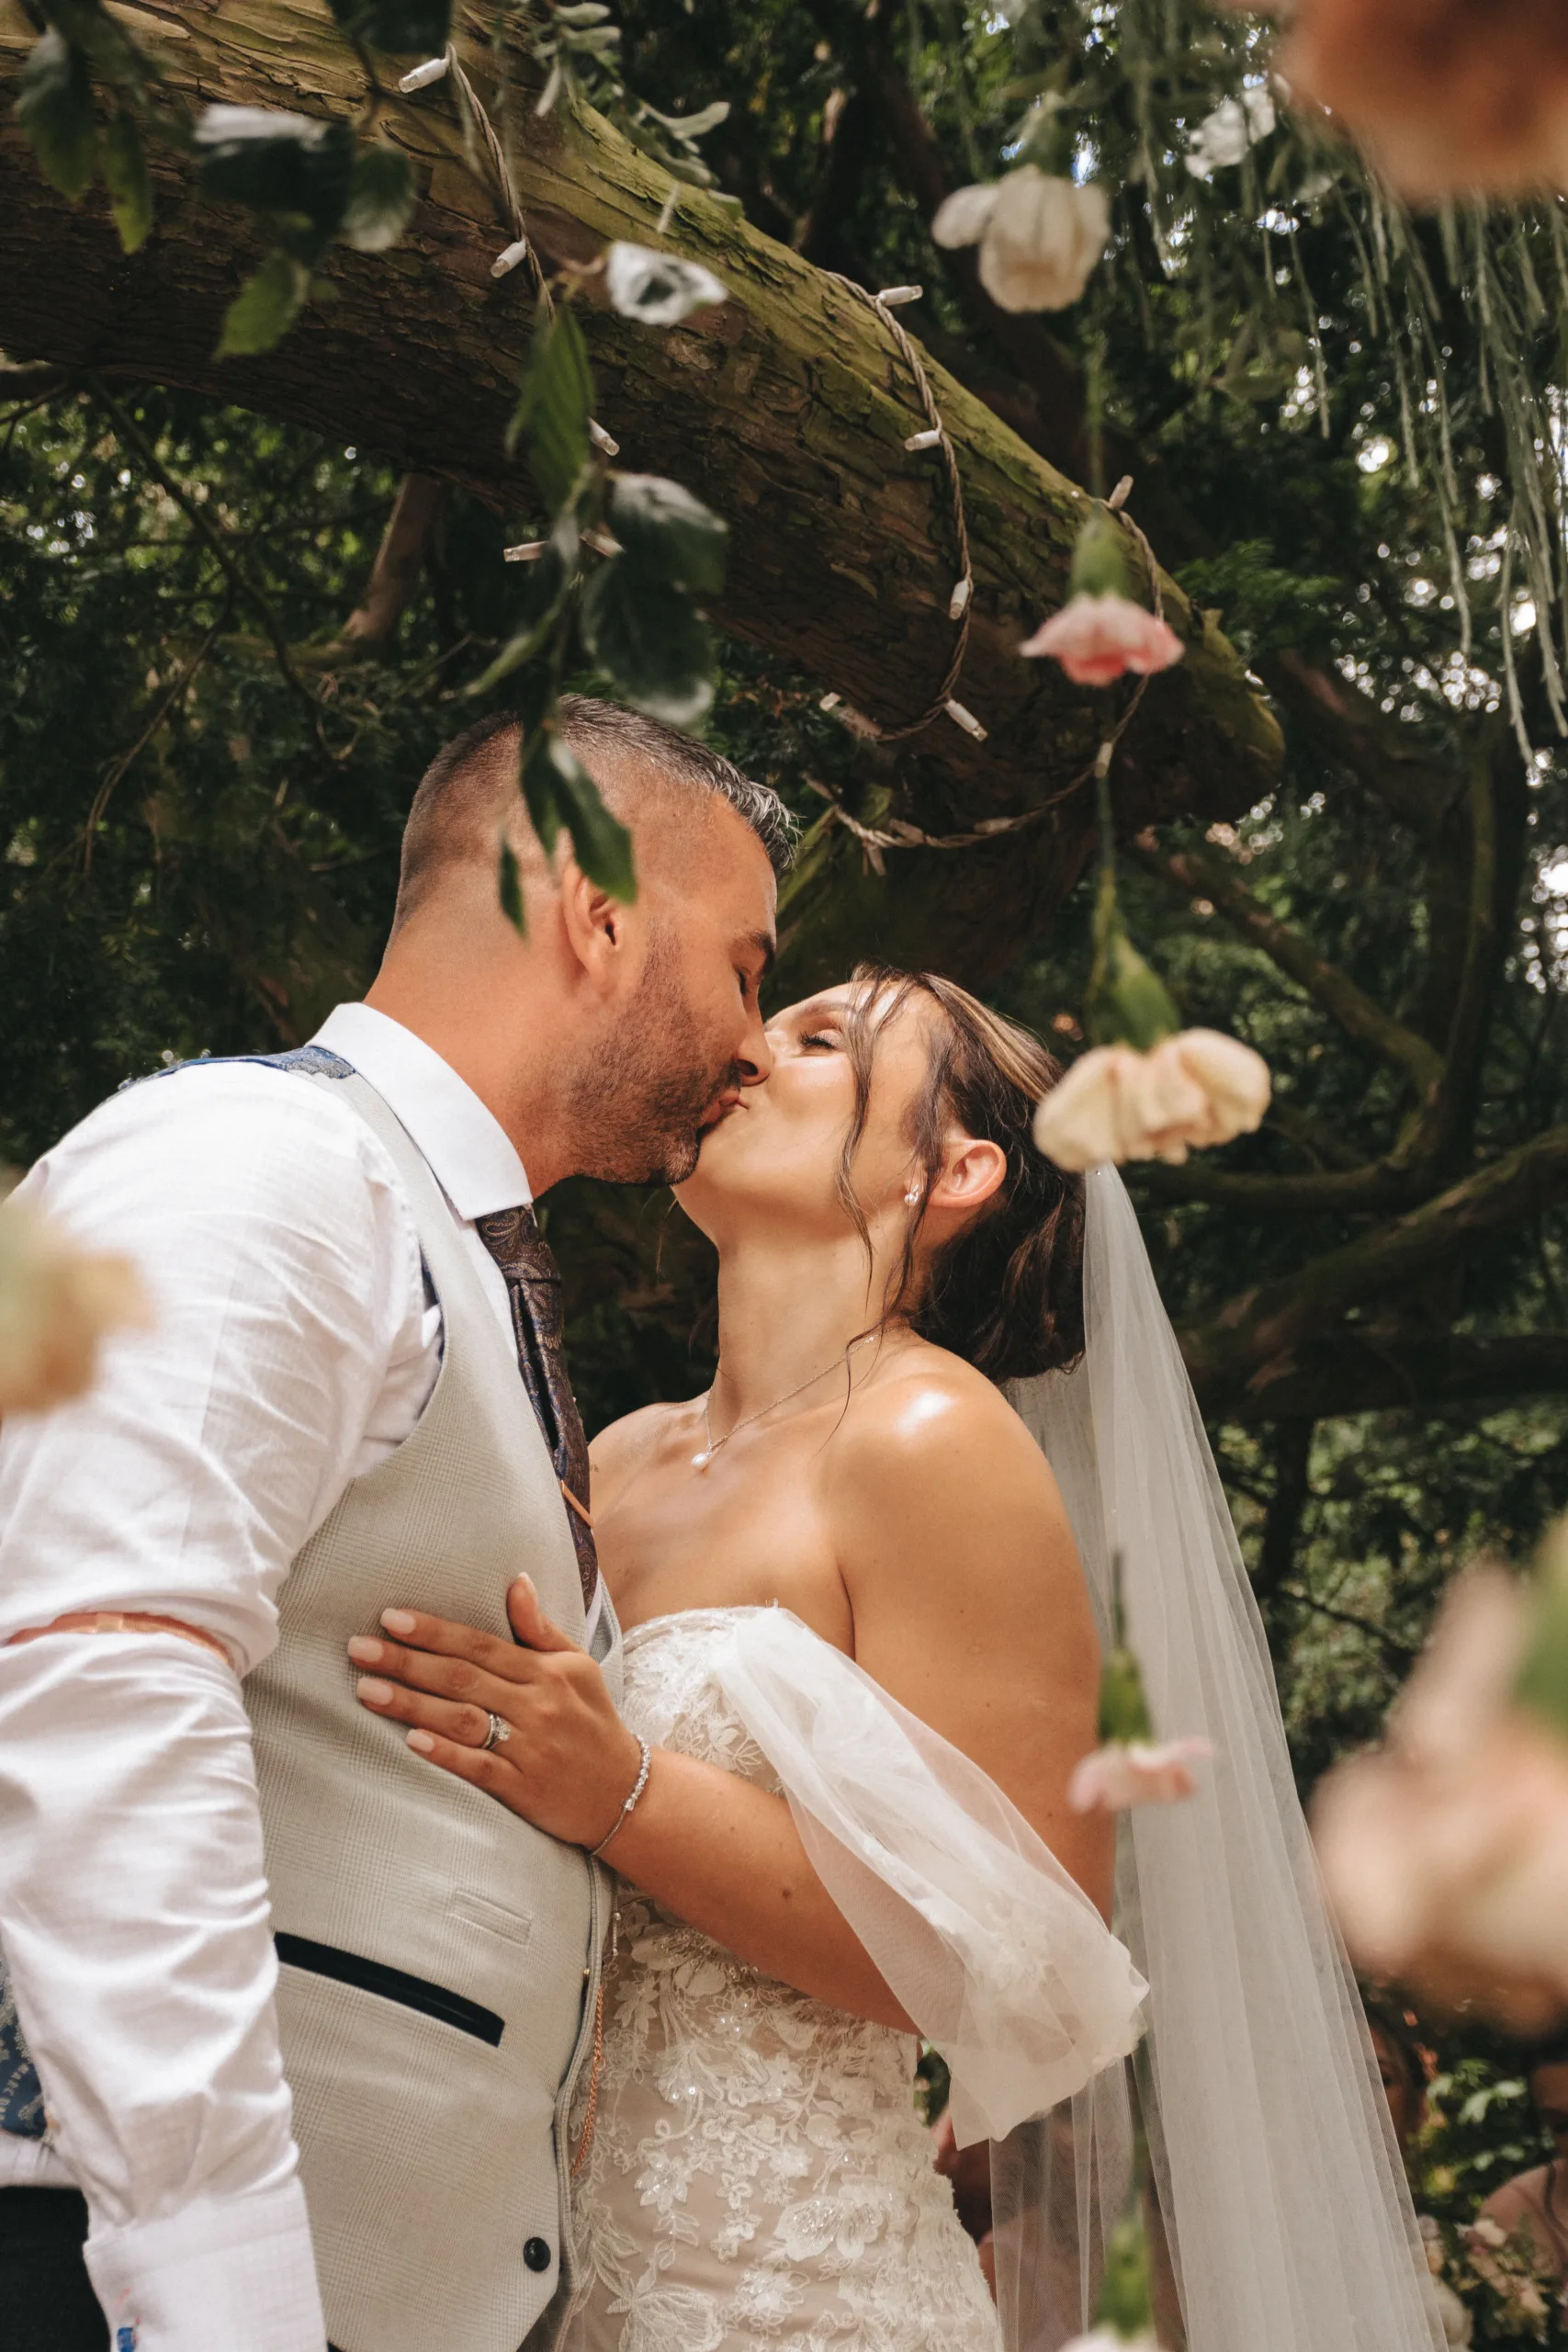 A bride and groom kiss under a tree in a Lincolnshire garden.